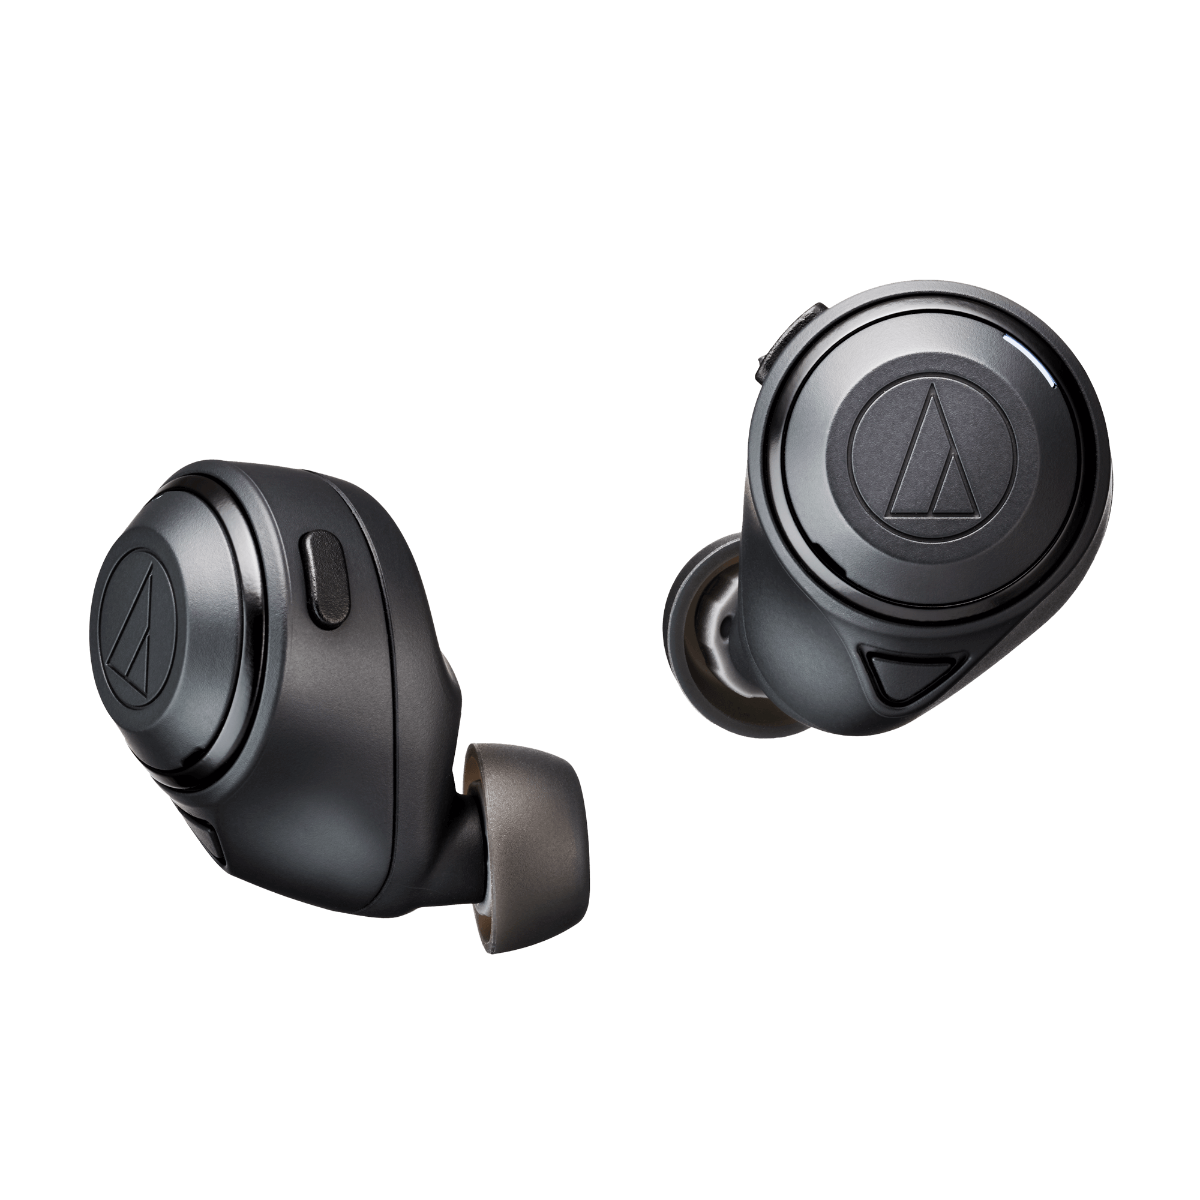 Audio-Technica white background product image of the ATH-CKS50TW Wireless Earbuds